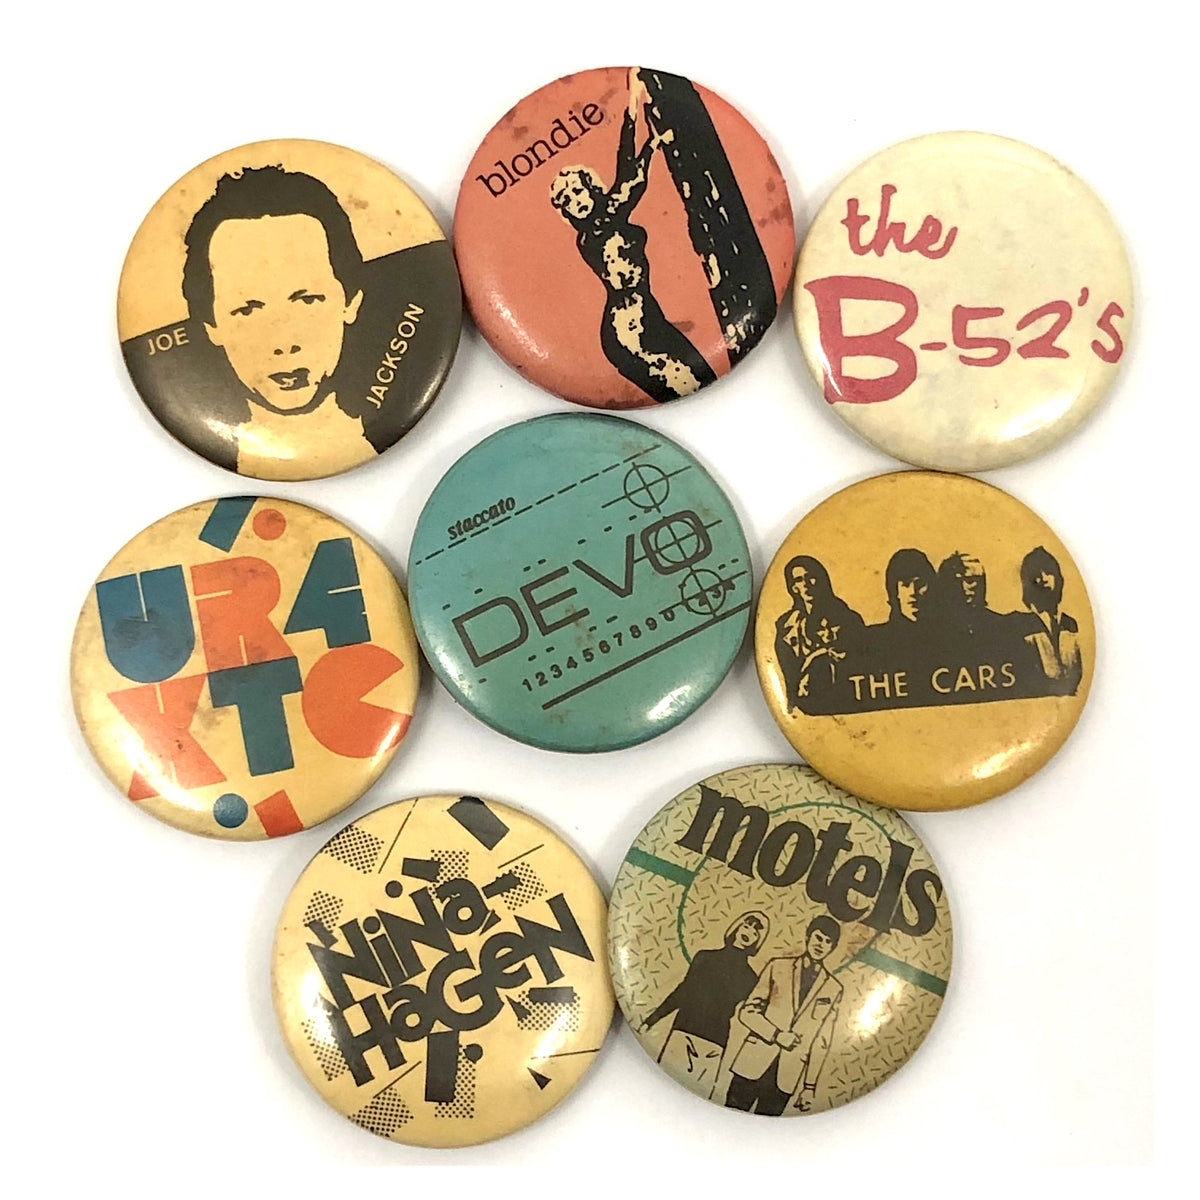 80's Bands 1 Button Pin Set Gogo's Bangles Blondie (9 pins total)